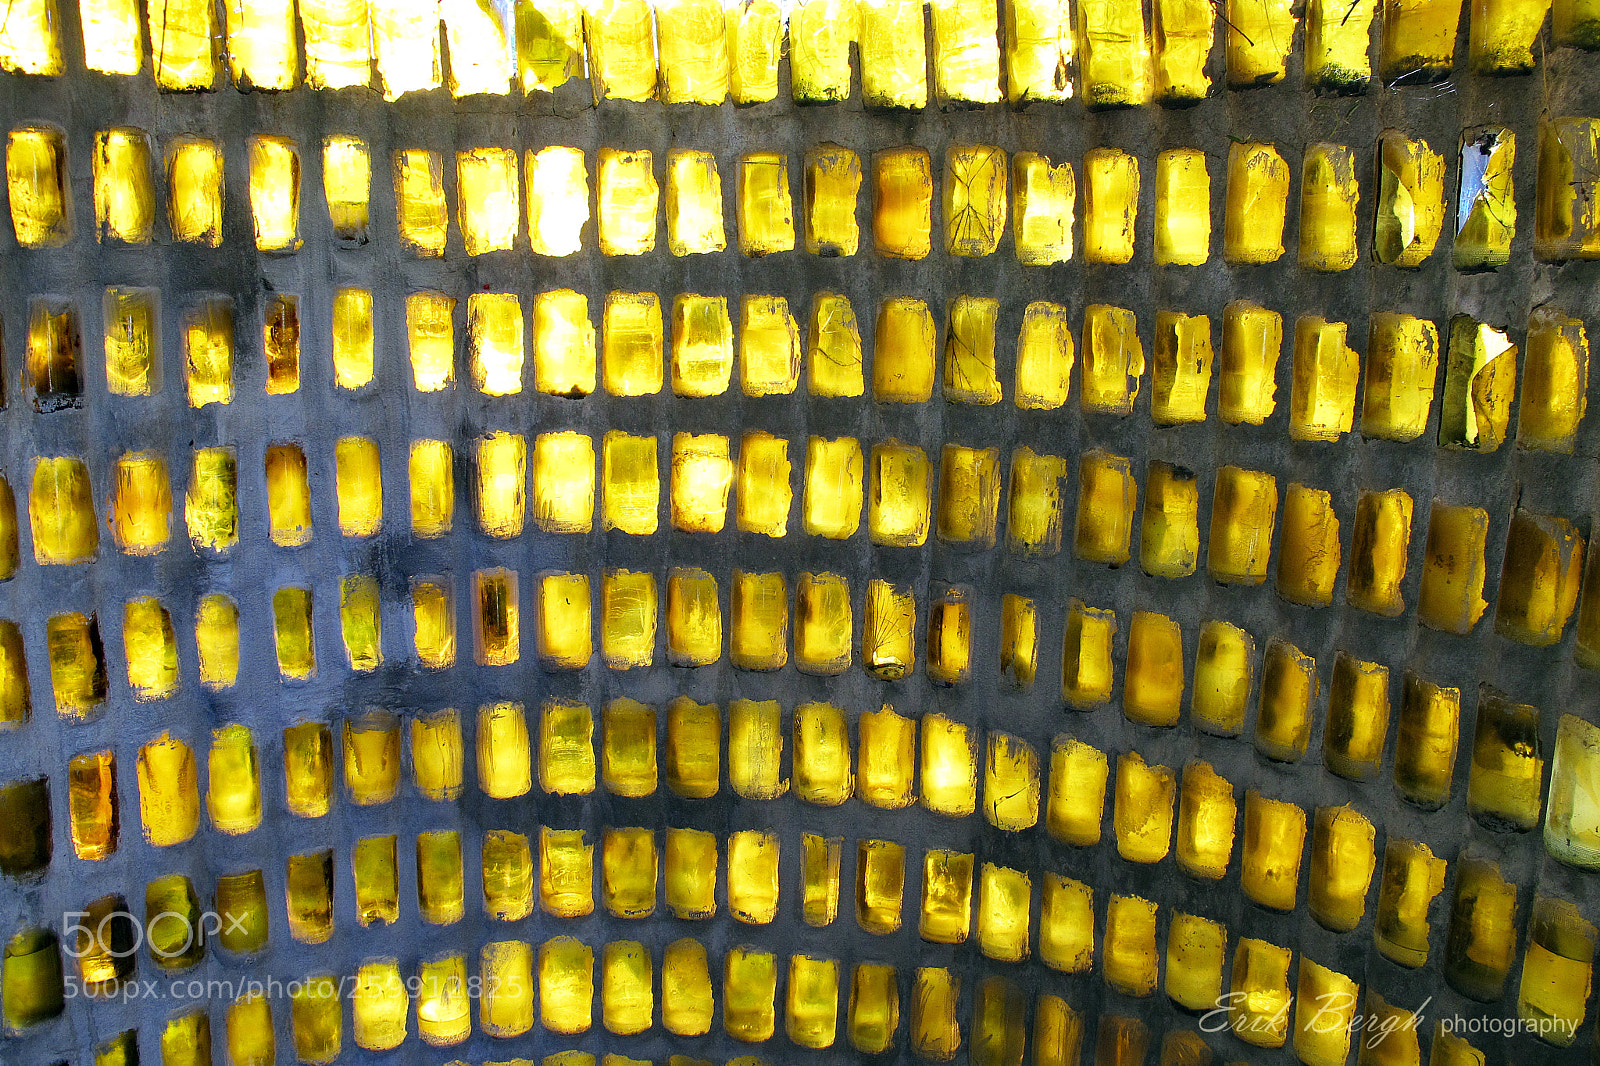 Canon PowerShot G12 sample photo. Beer bottle wall photography